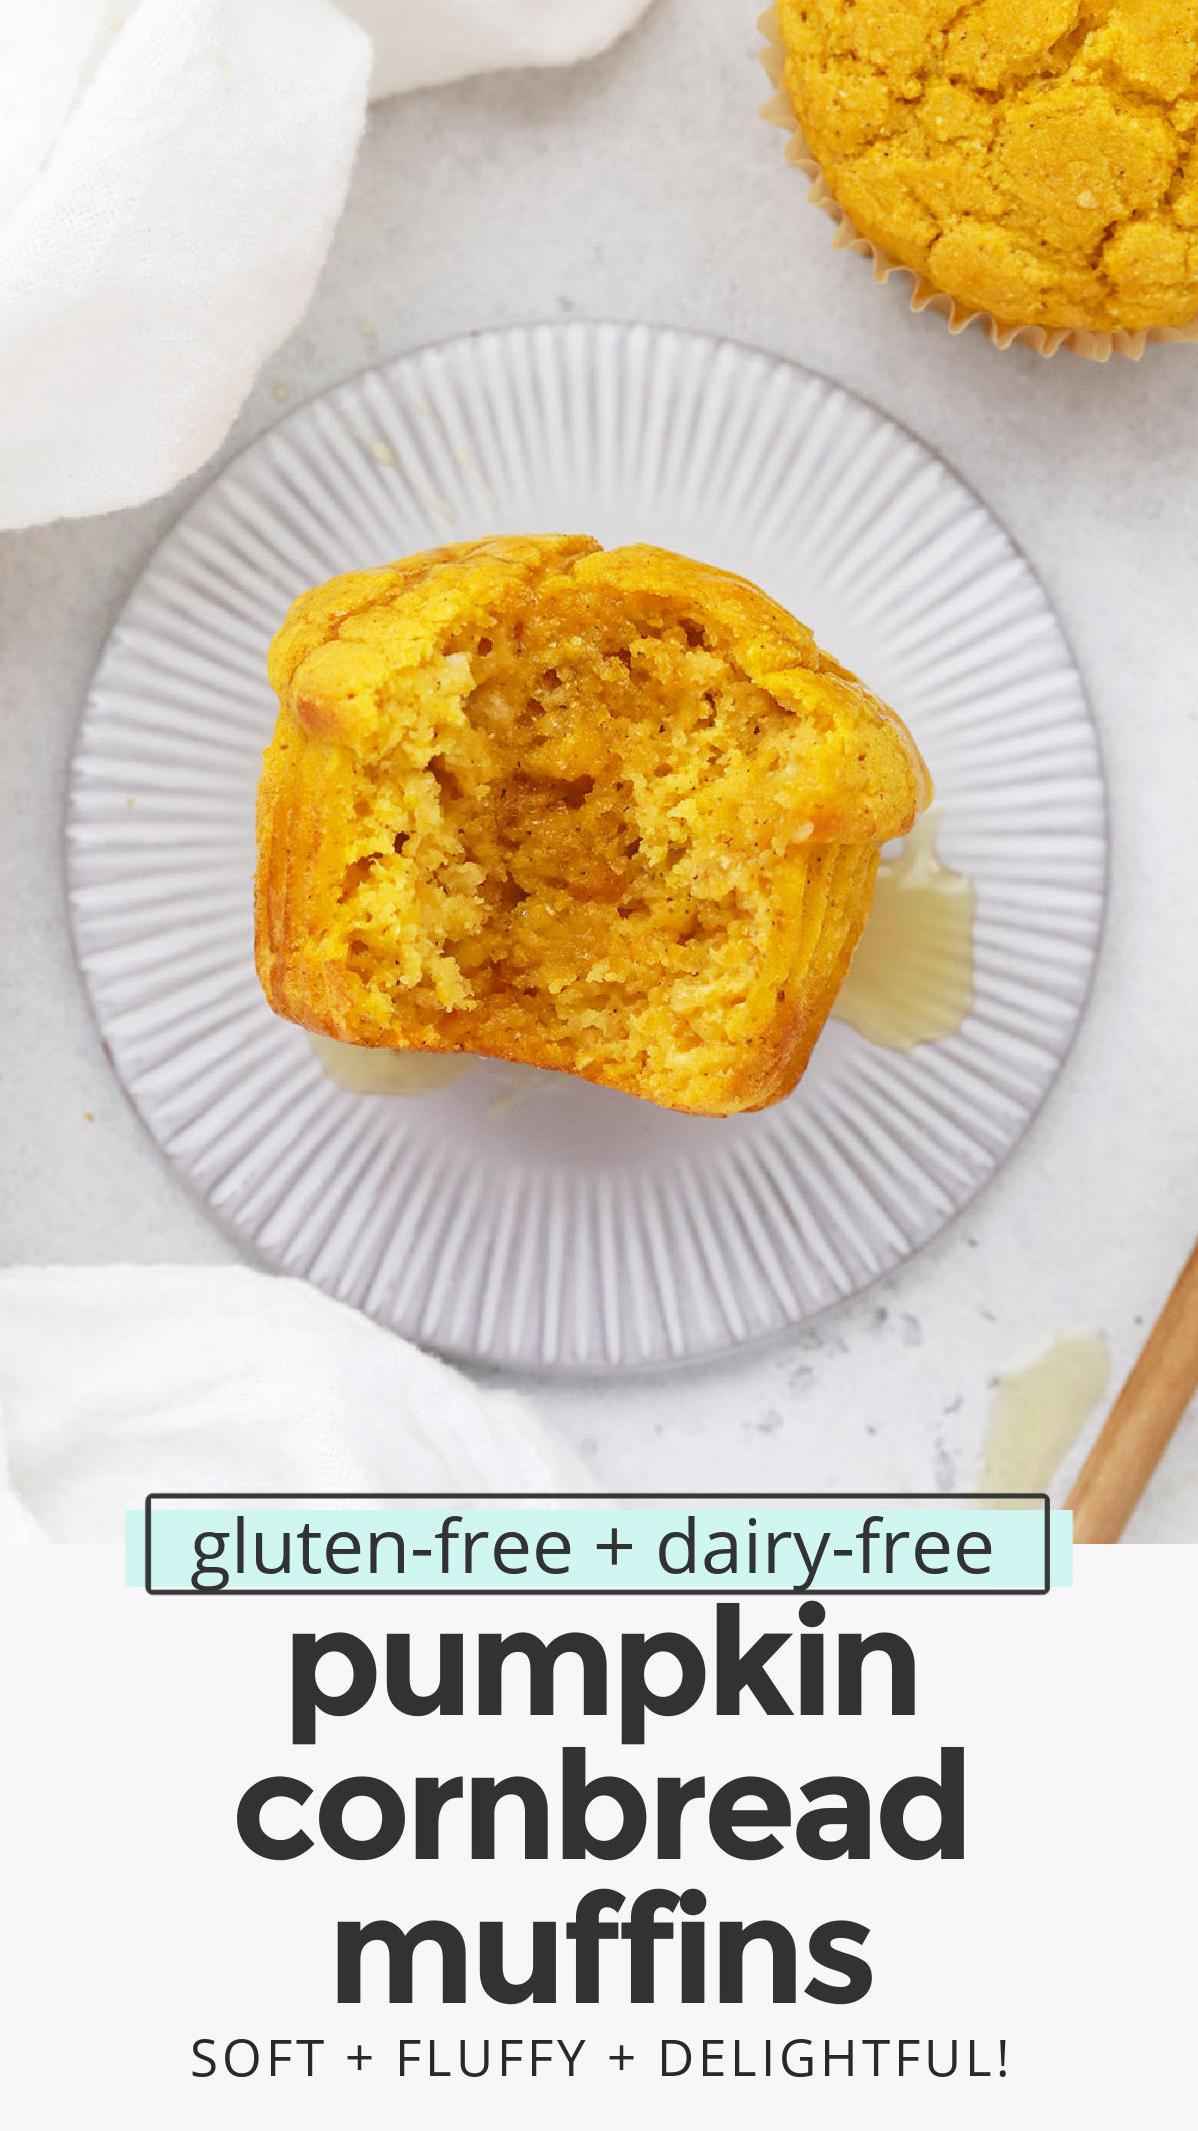  Who said gluten-free food can't be delicious? This pumpkin cornbread is the proof!